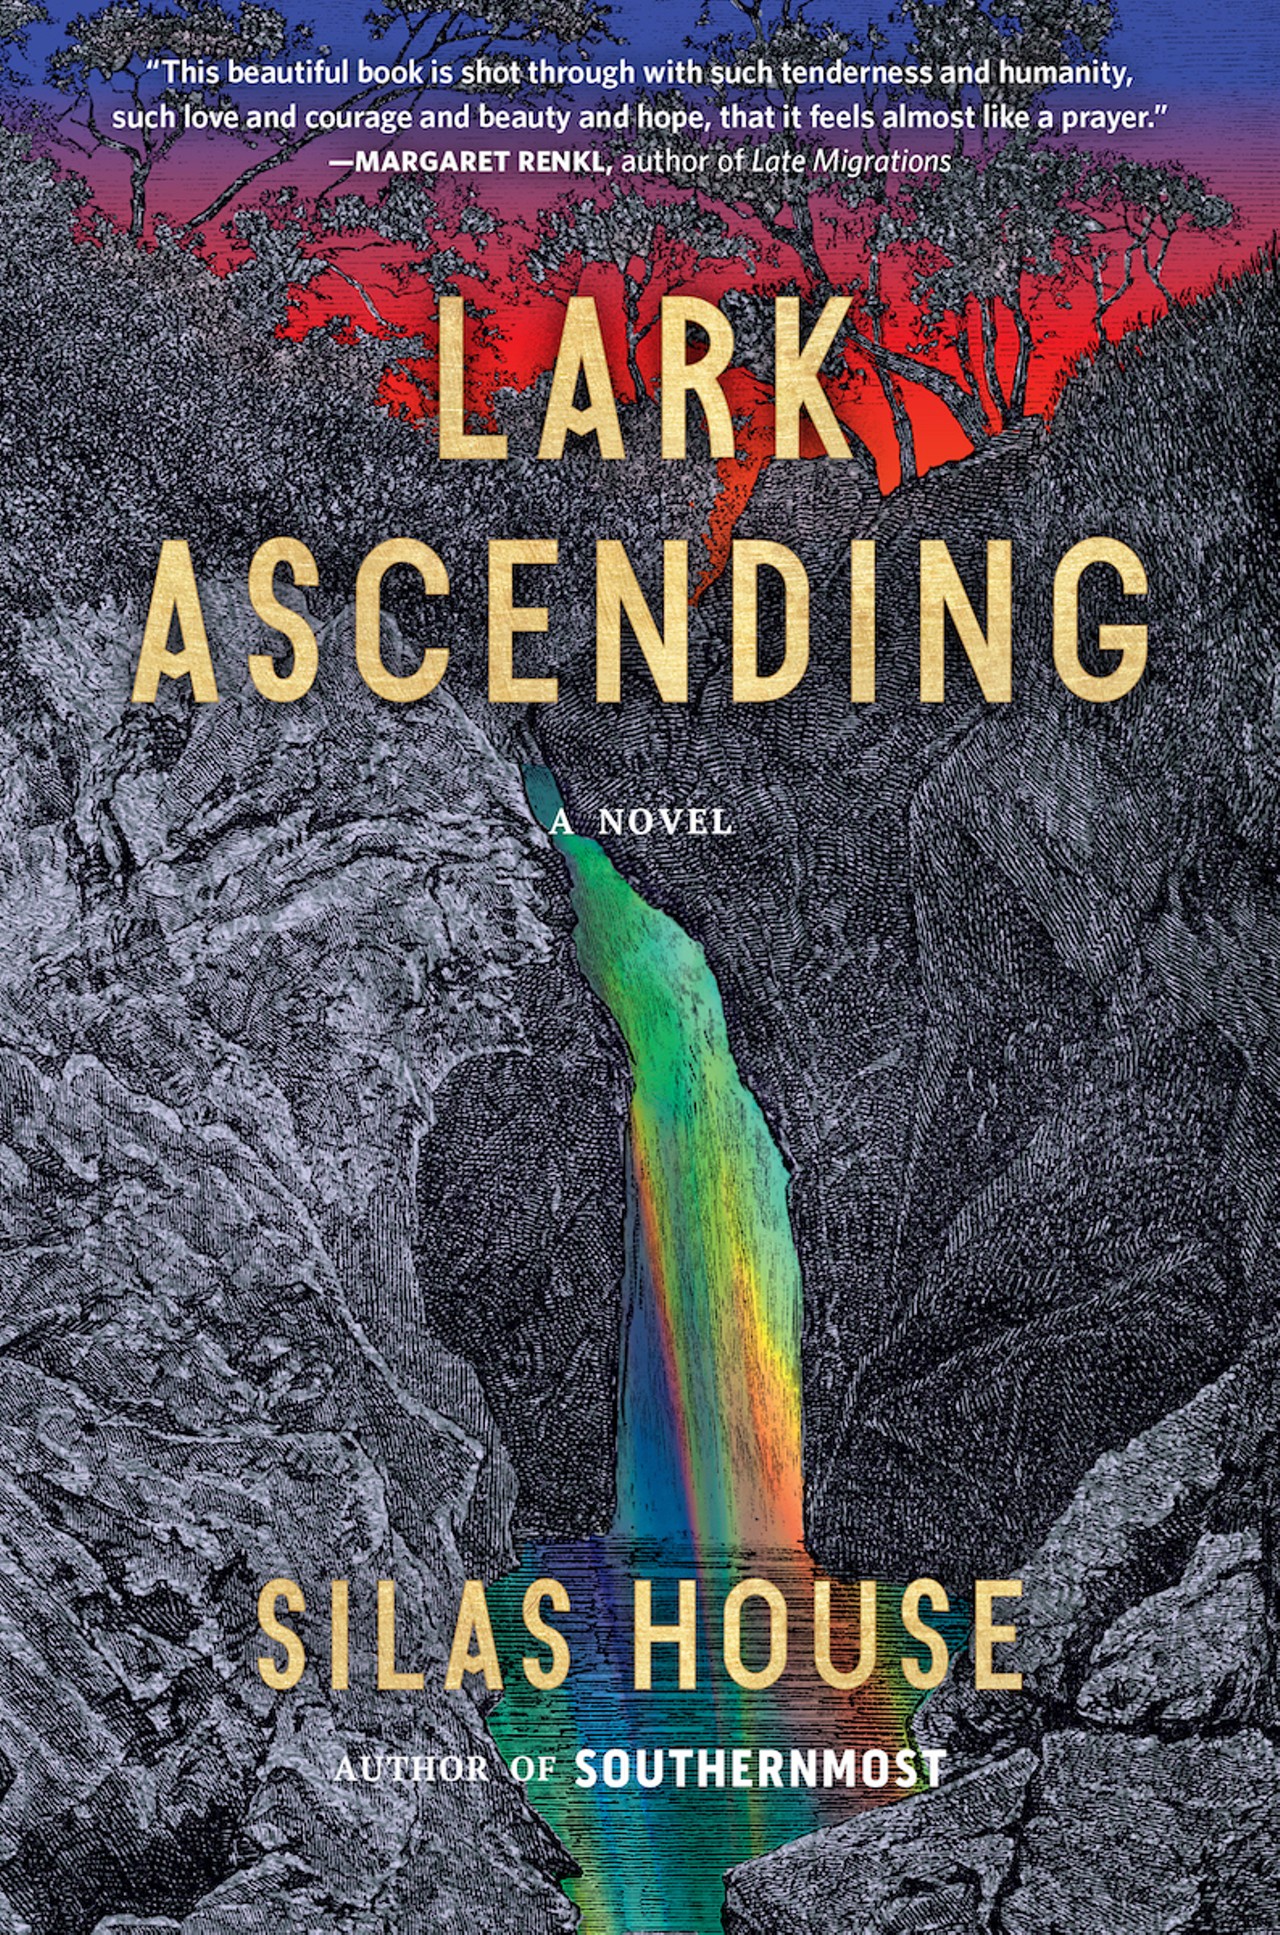 Lark Ascending by Silas House
Silas House is Kentucky’s current poet laureate, an honor that came on the heels of a big 2022: House was the recipient of the Duggins Prize, the largest award for an LGBTQ writer in the country, and named Appalachian of the Year. A dystopian tale of found family, Lark Ascending marks his seventh novel. Set in the near future, it sees America in flames (literally) and in the grip of religious nationalism. 
The book –– winner of the 2023 Southern Book and Nautilus Book prizes –– follows Lark and his family as they attempt to escape America for Ireland, which may not be the safe haven he thought it’d be.